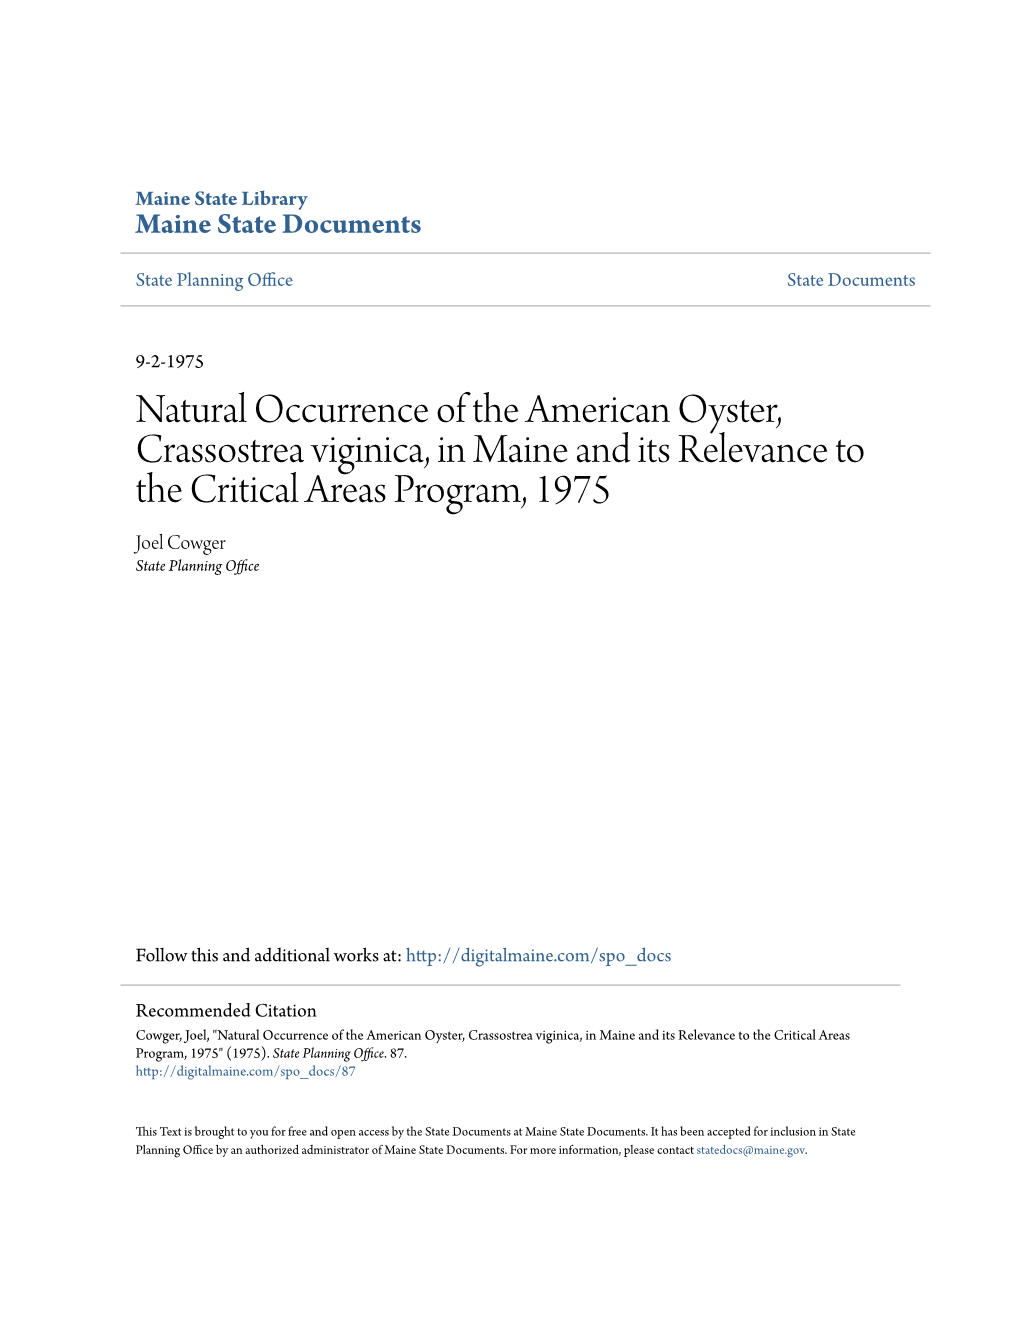 Natural Occurrence of the American Oyster, Crassostrea Viginica, in Maine and Its Relevance to the Critical Areas Program, 1975 Joel Cowger State Planning Office